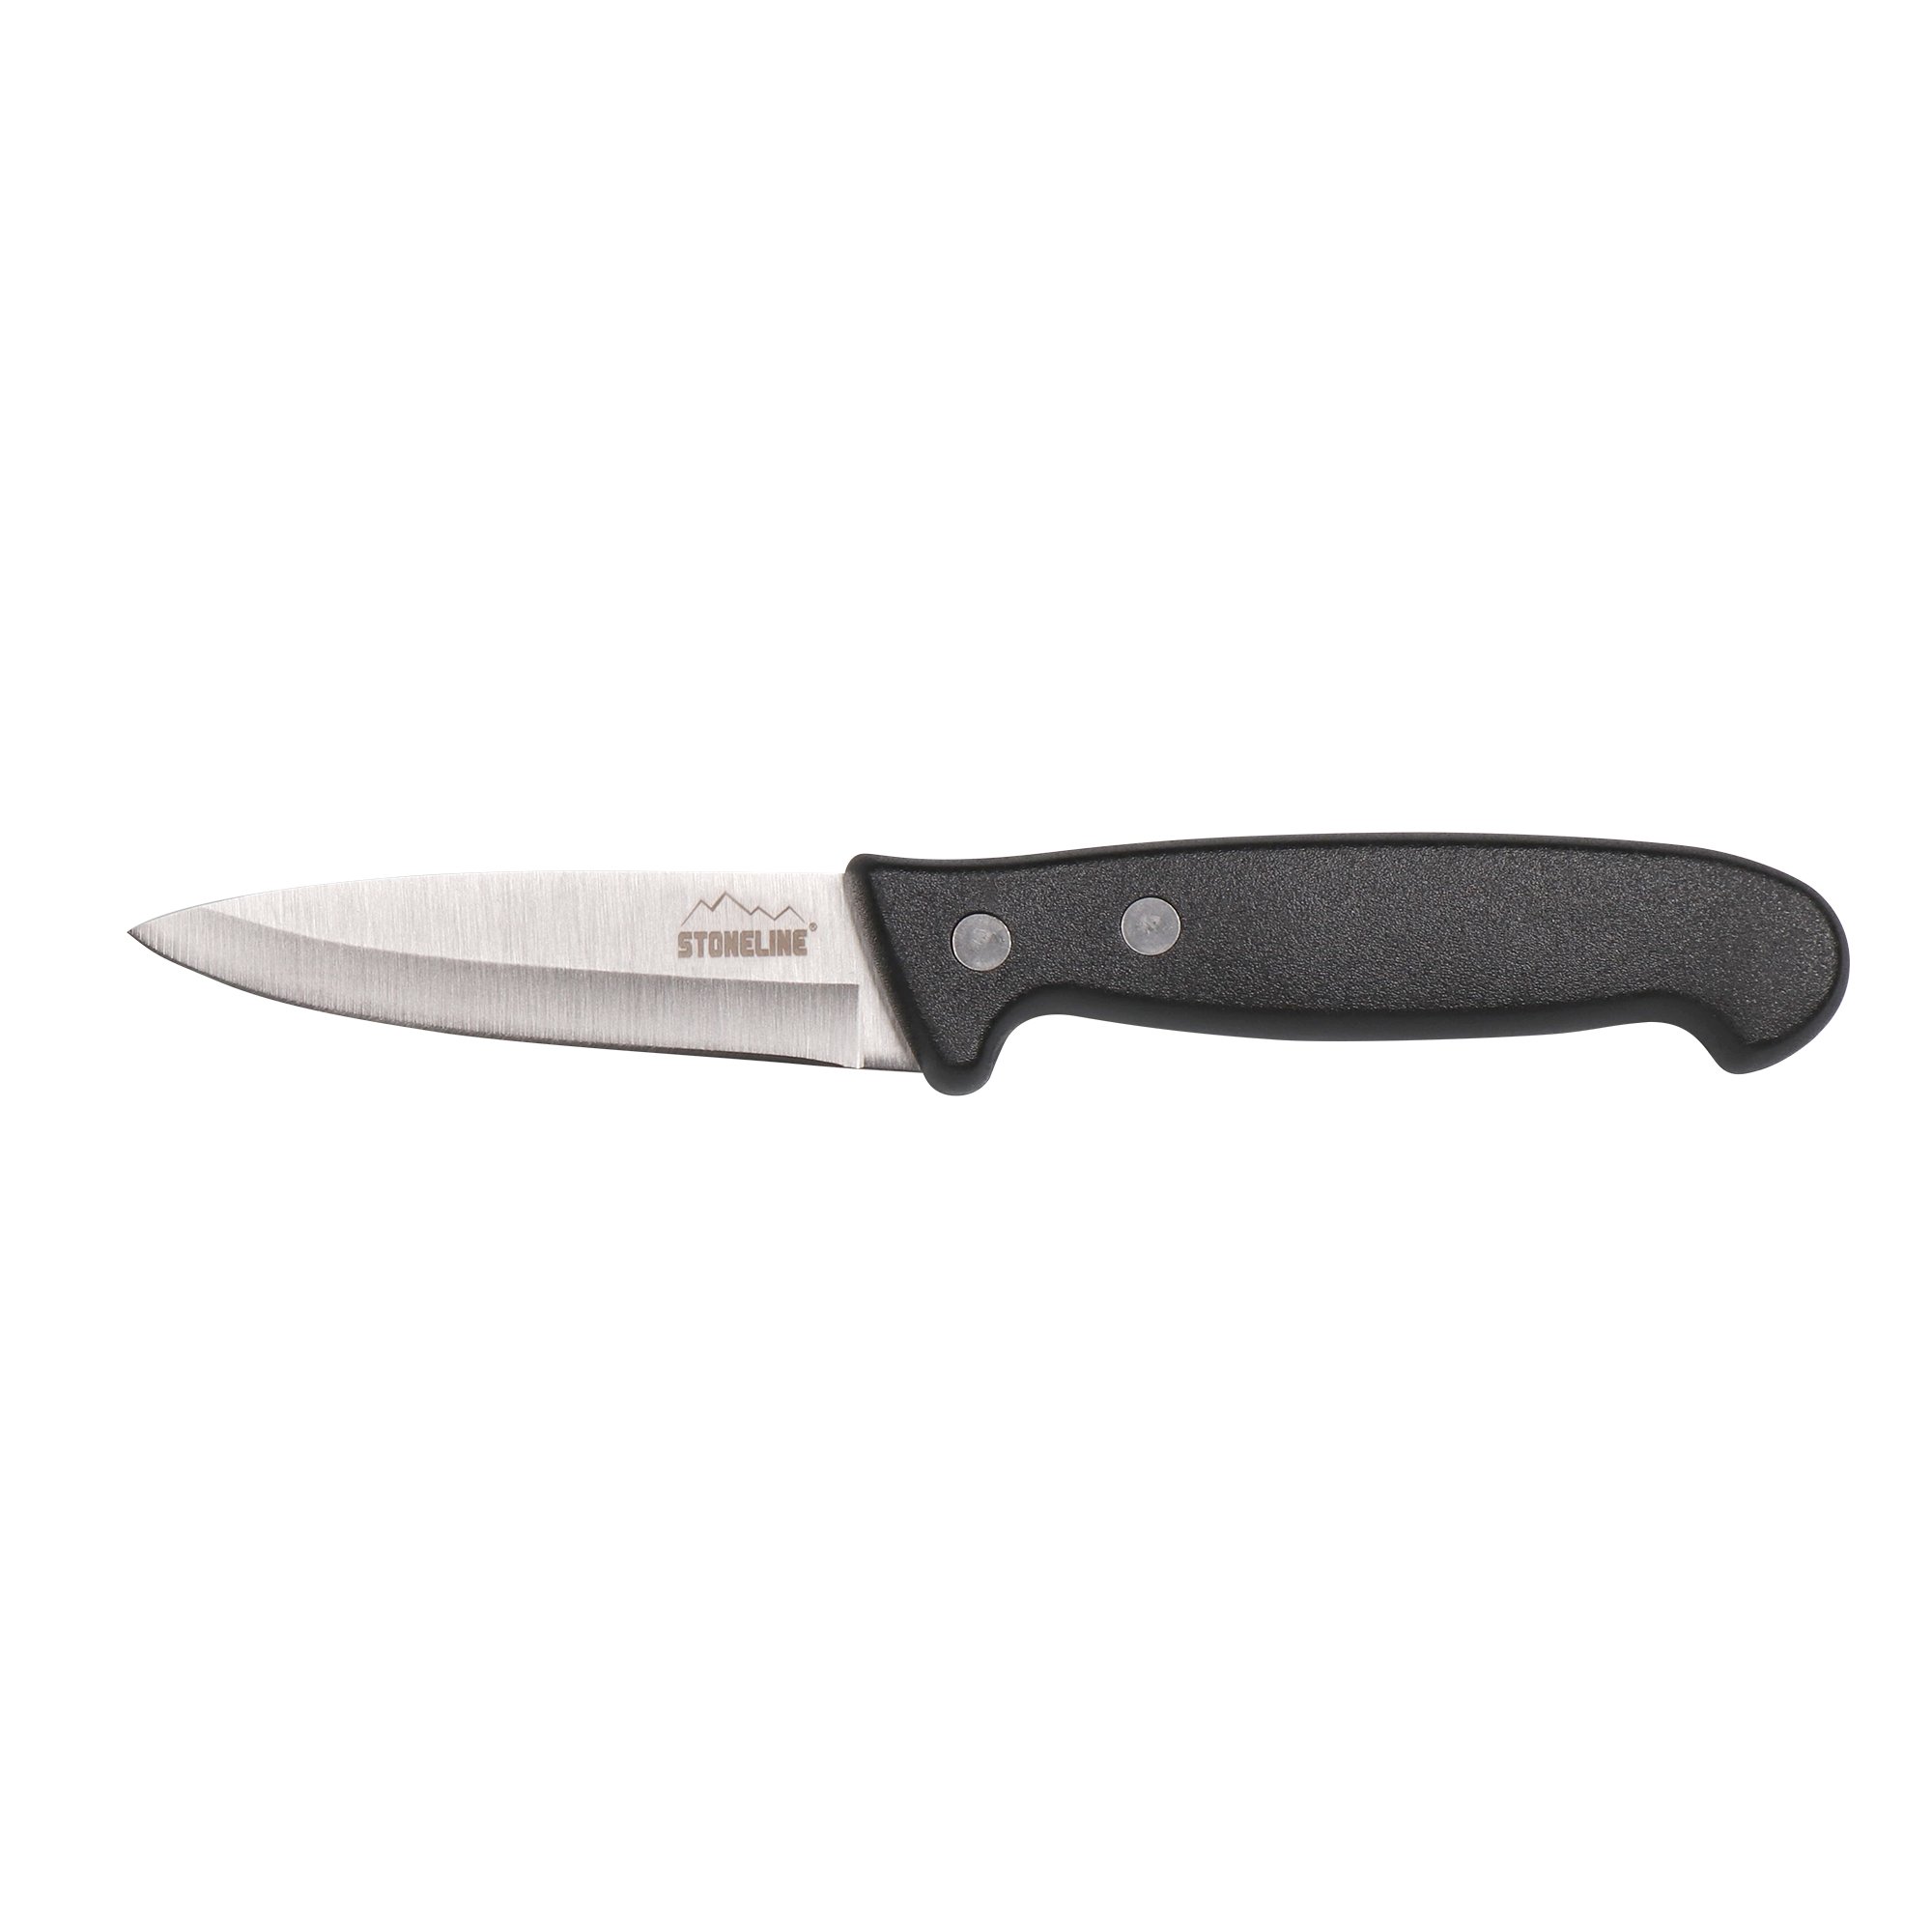 STONELINE® Stainless Steel Knife 18.7 cm Paring Knife, Safety Sheath